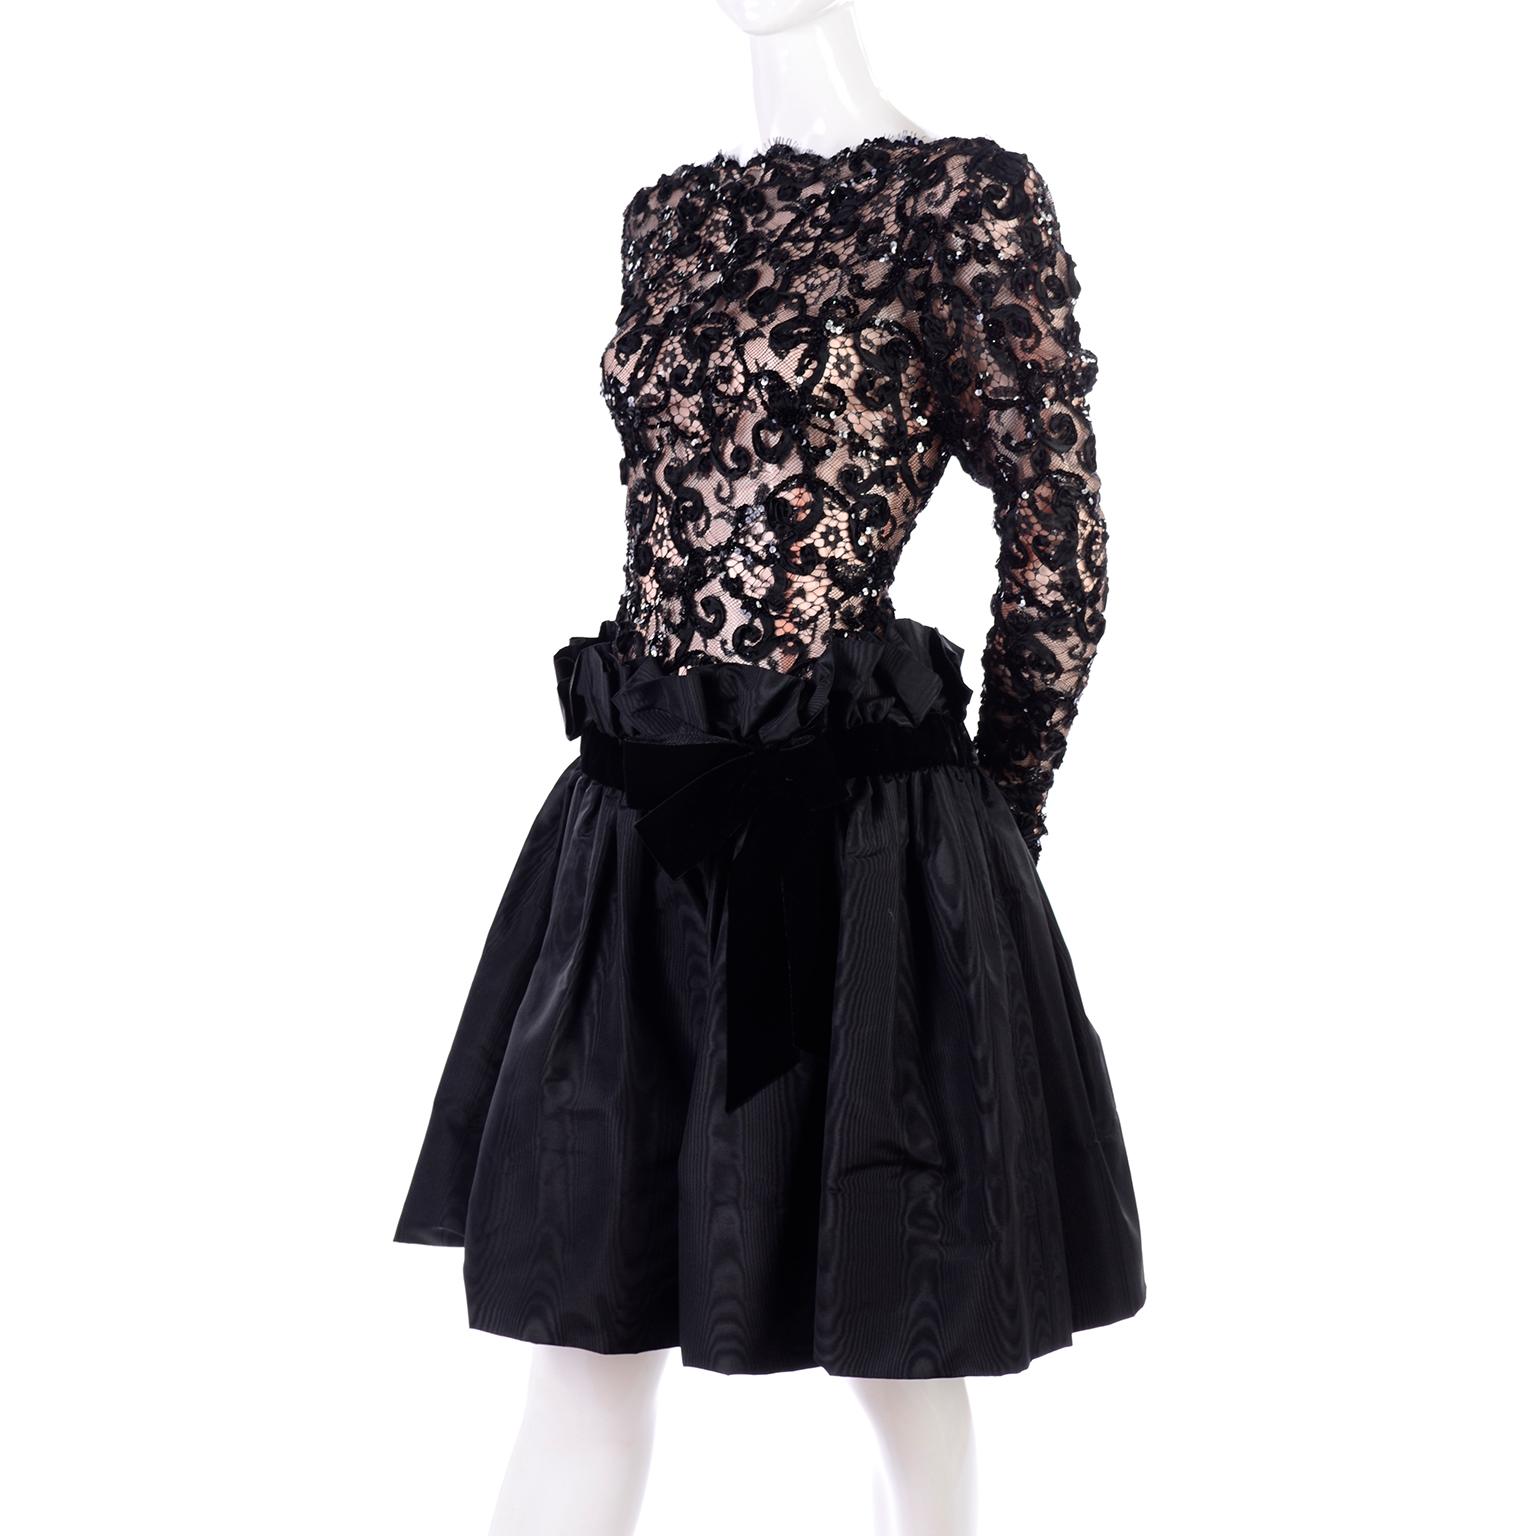 This is an absolutely gorgeous Bob Mackie vintage black dress from the 1980's. The lace illusion bodice has a tan lining and is adorned with sequins and ribbons, with eyelash scalloped edges. There is a drop paper bag style waist and the skirt